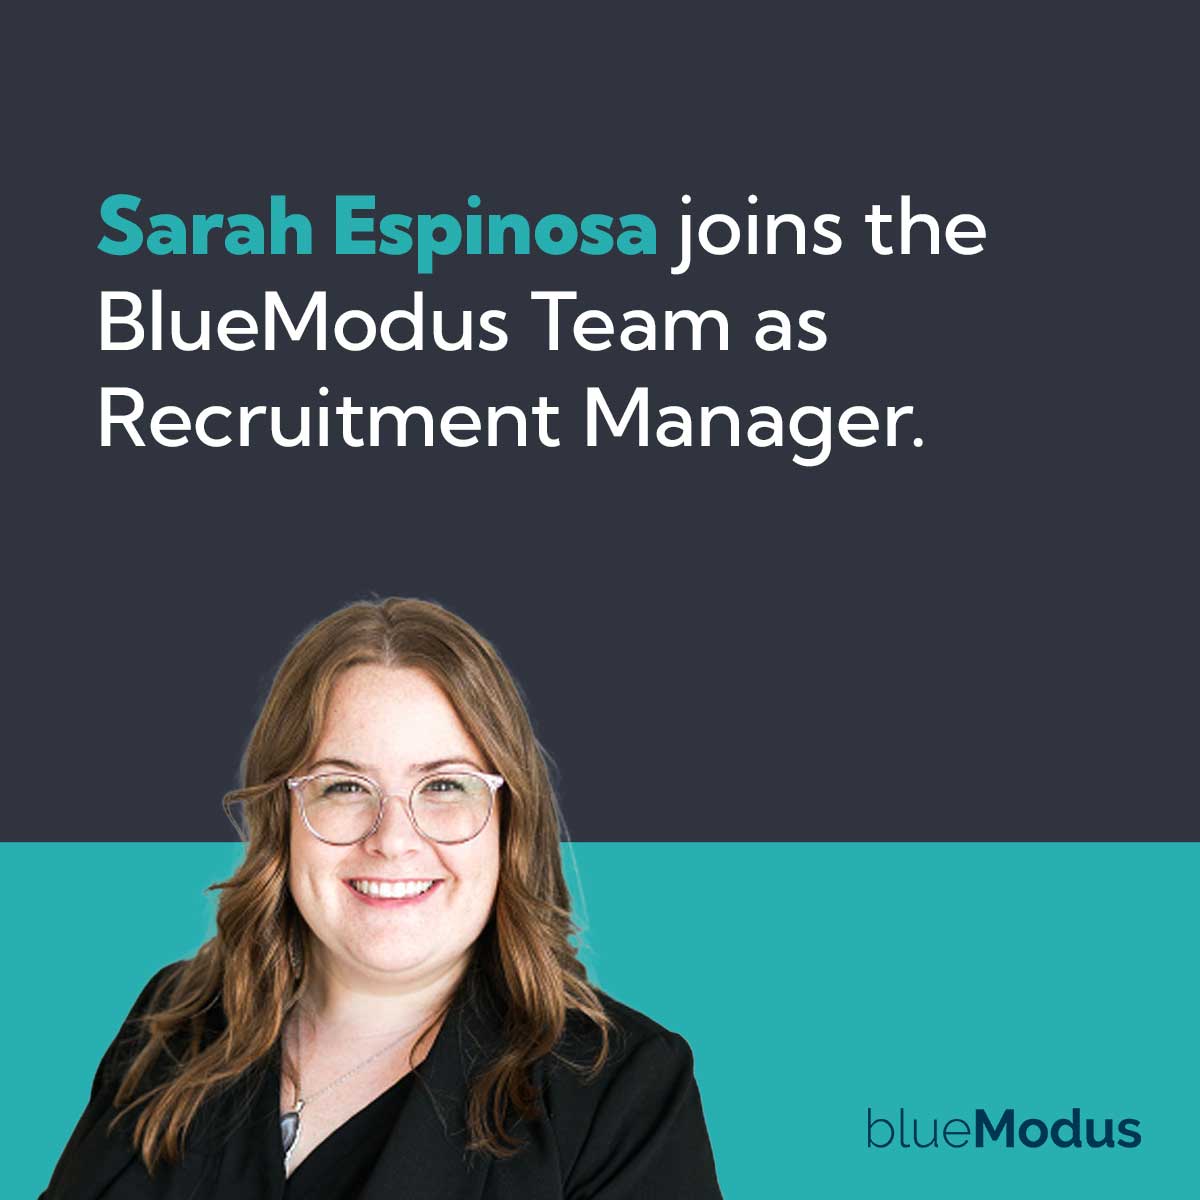 BlueModus Welcomes Sarah Espinosa as Recruitment Manager